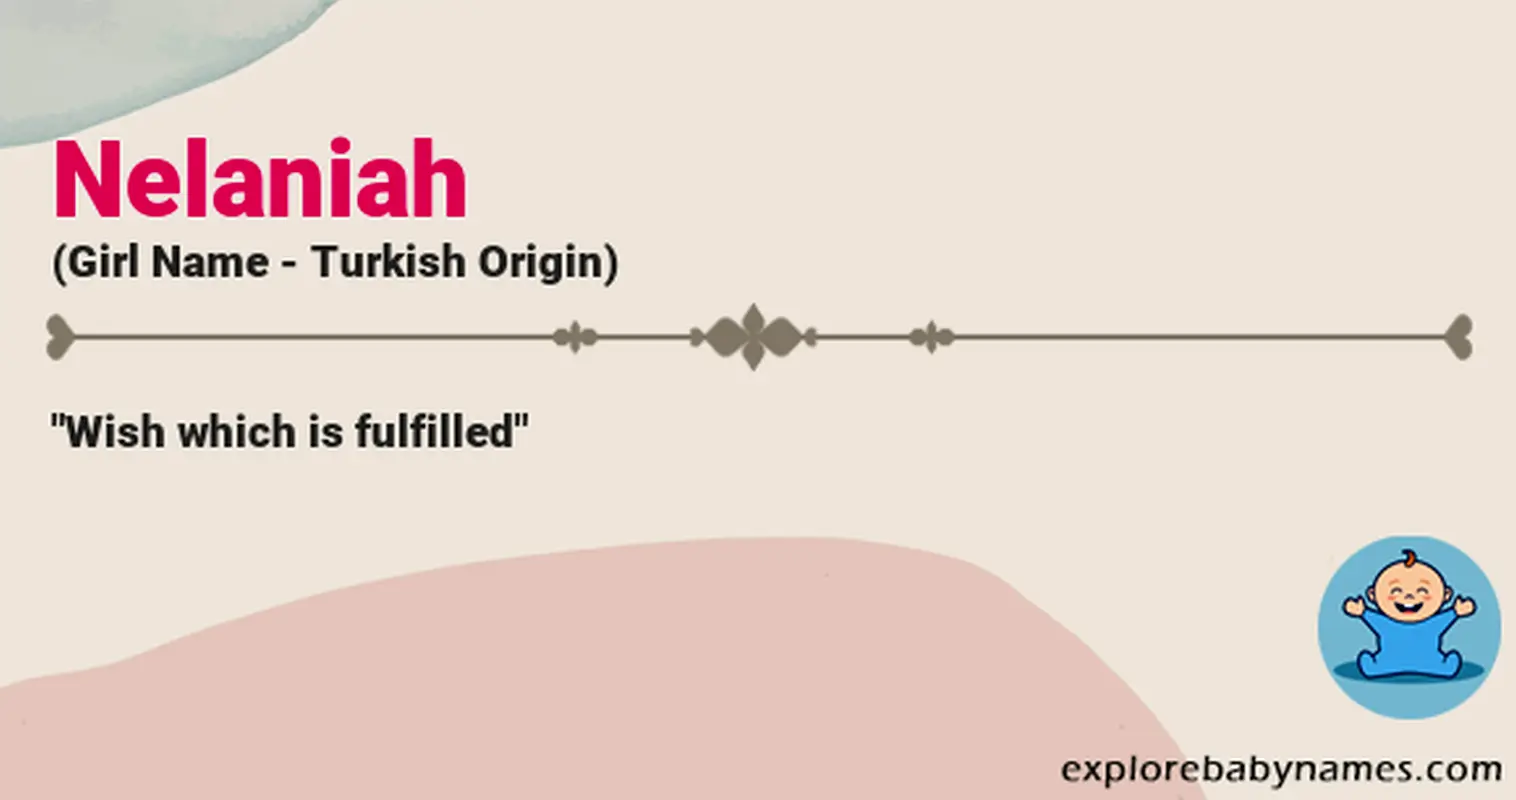 Meaning of Nelaniah